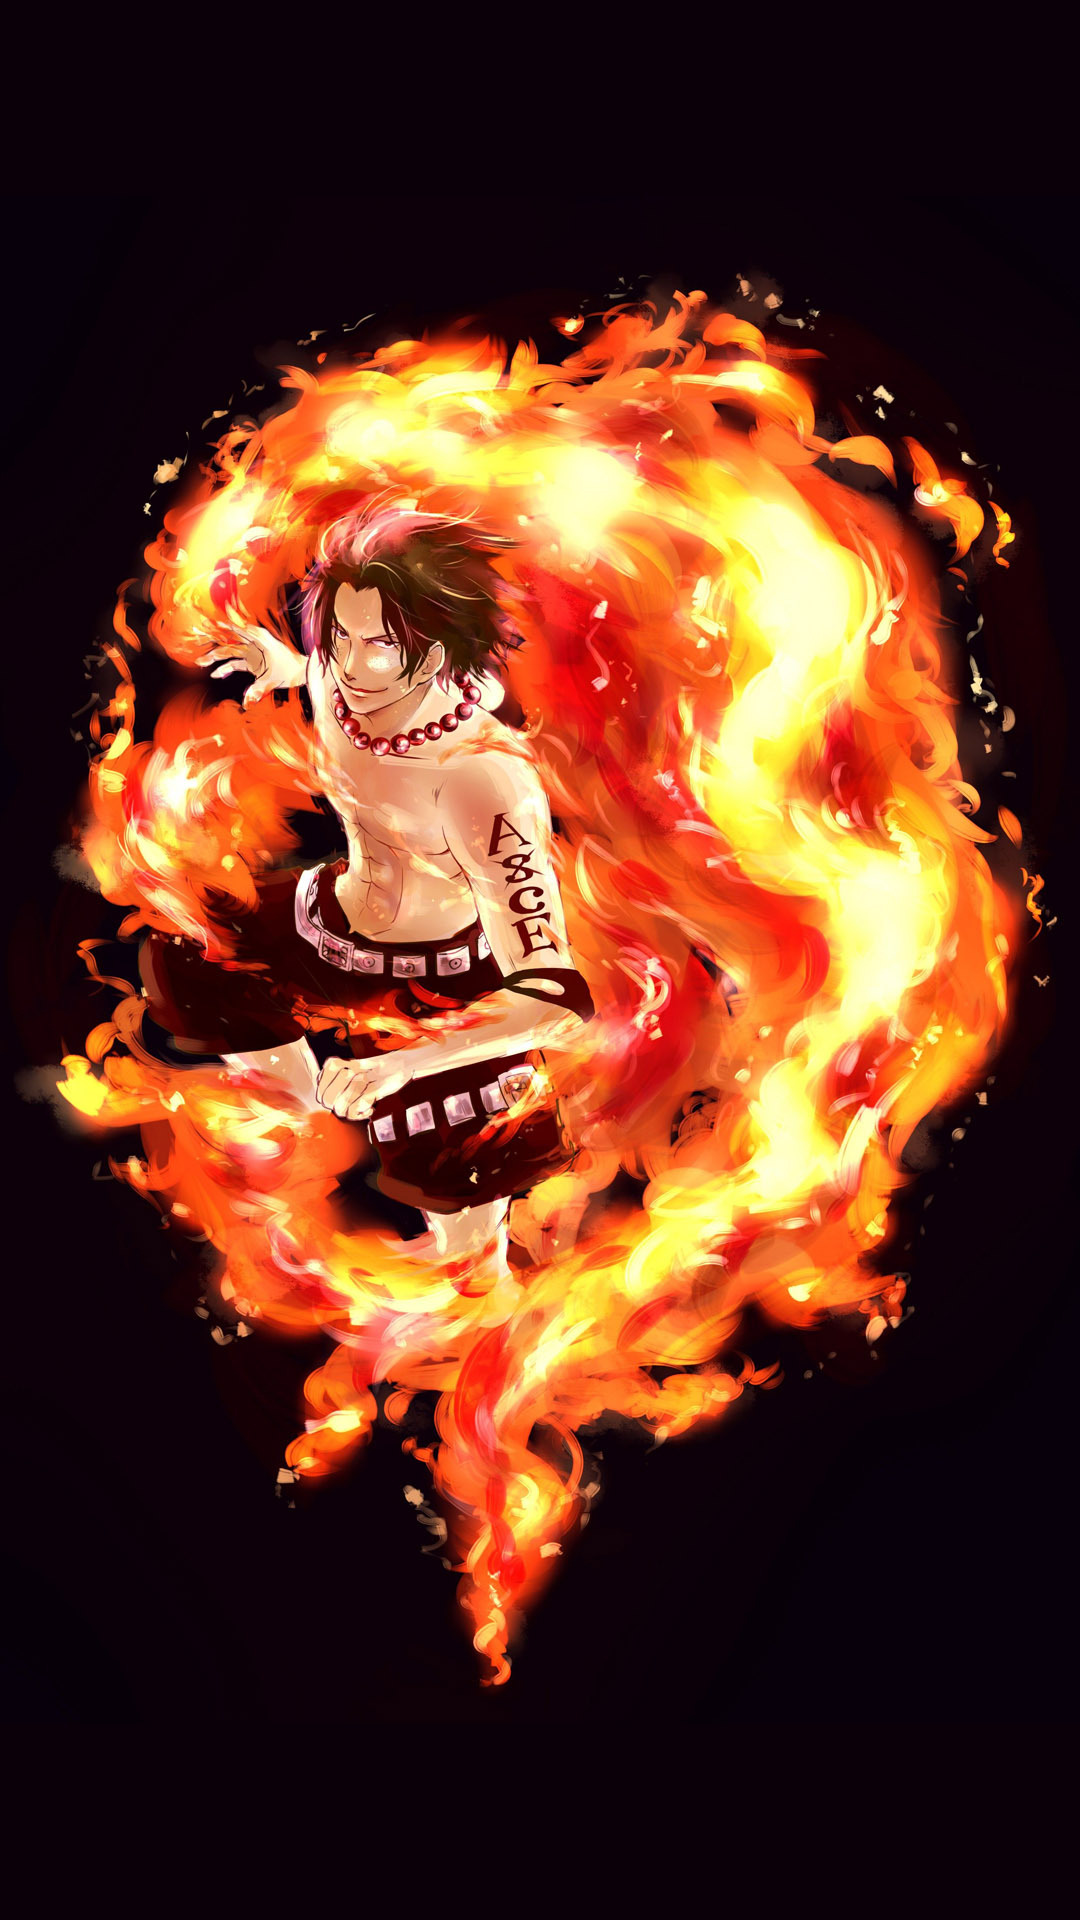 Manga One Piece Portgas D Ace Iphone 6 Wallpaper Iphone Wallpapers